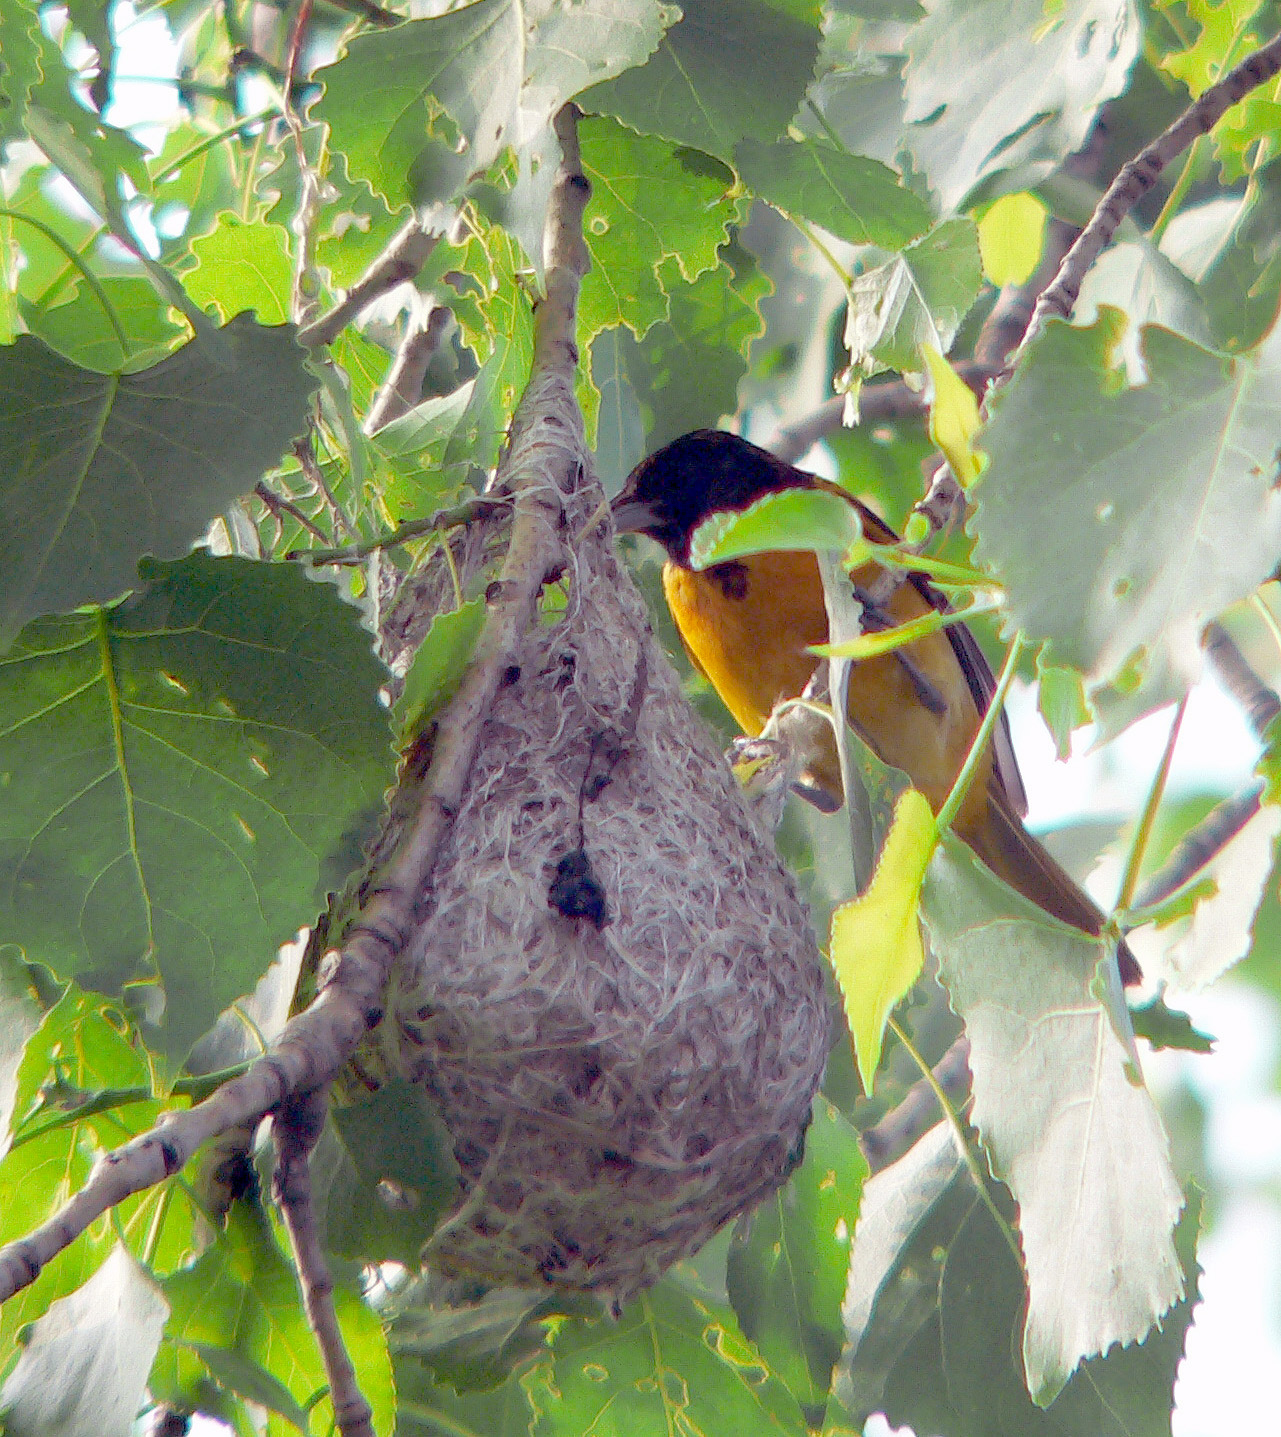 Male Baltimore Oriole at nest. These woven nests are so sturdy they often last through the  entire year.